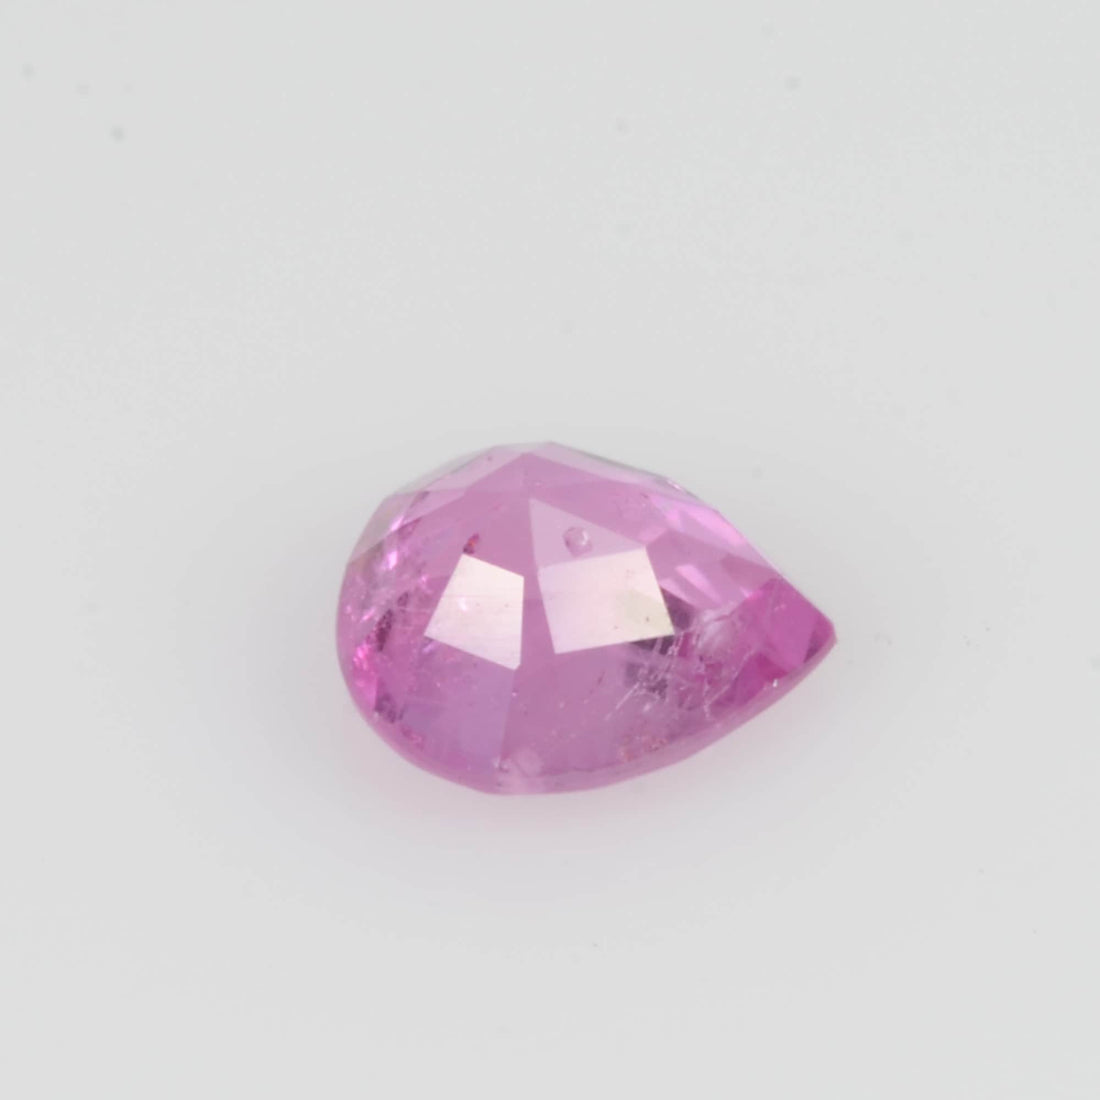 0.37 Cts Natural Pink Sapphire Loose Gemstone oval Cut